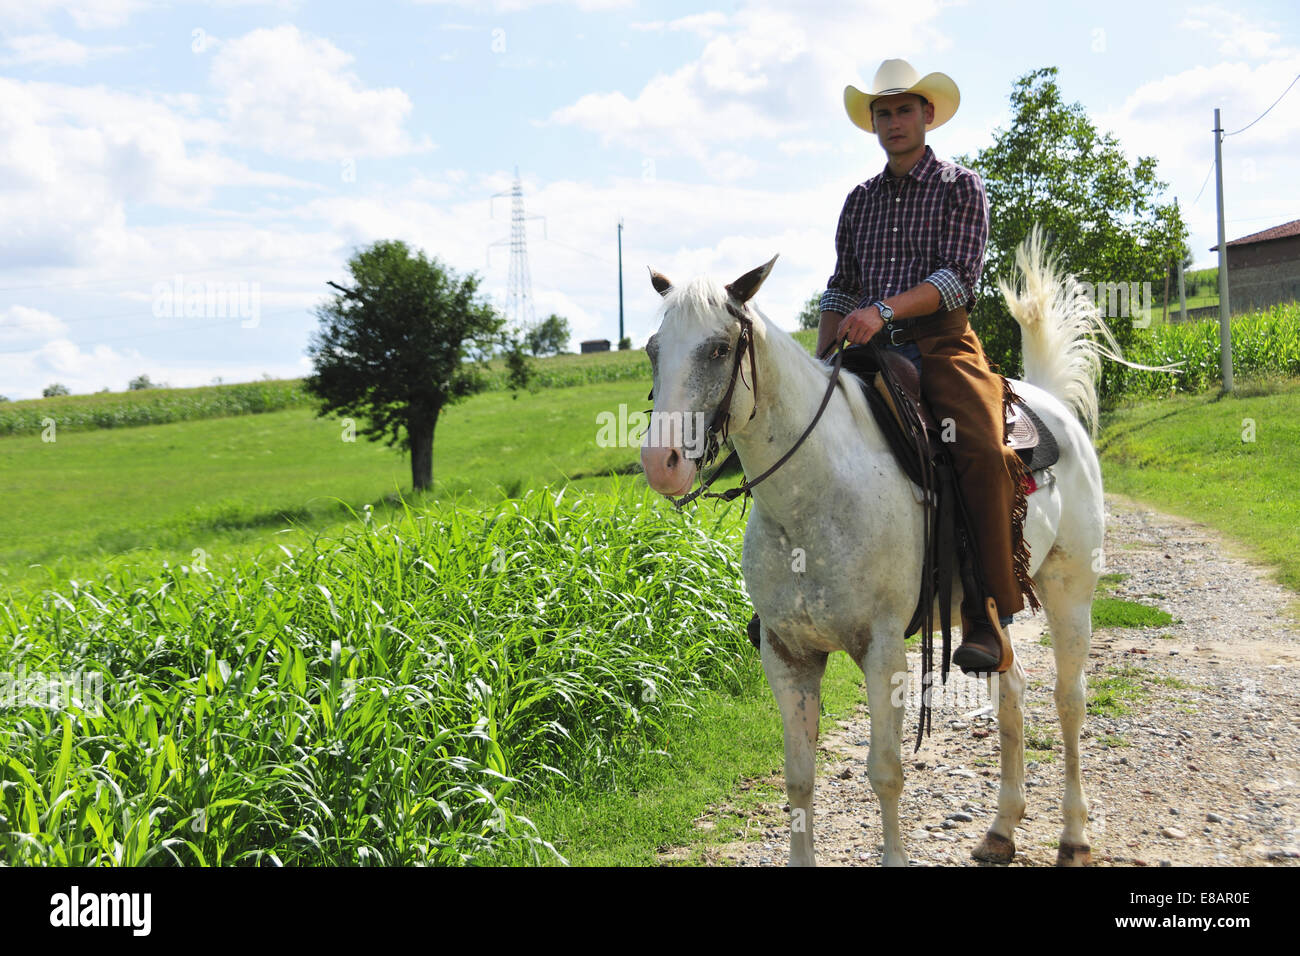 Portrait of young man in cowboy gear riding horse on rural road Stock Photo